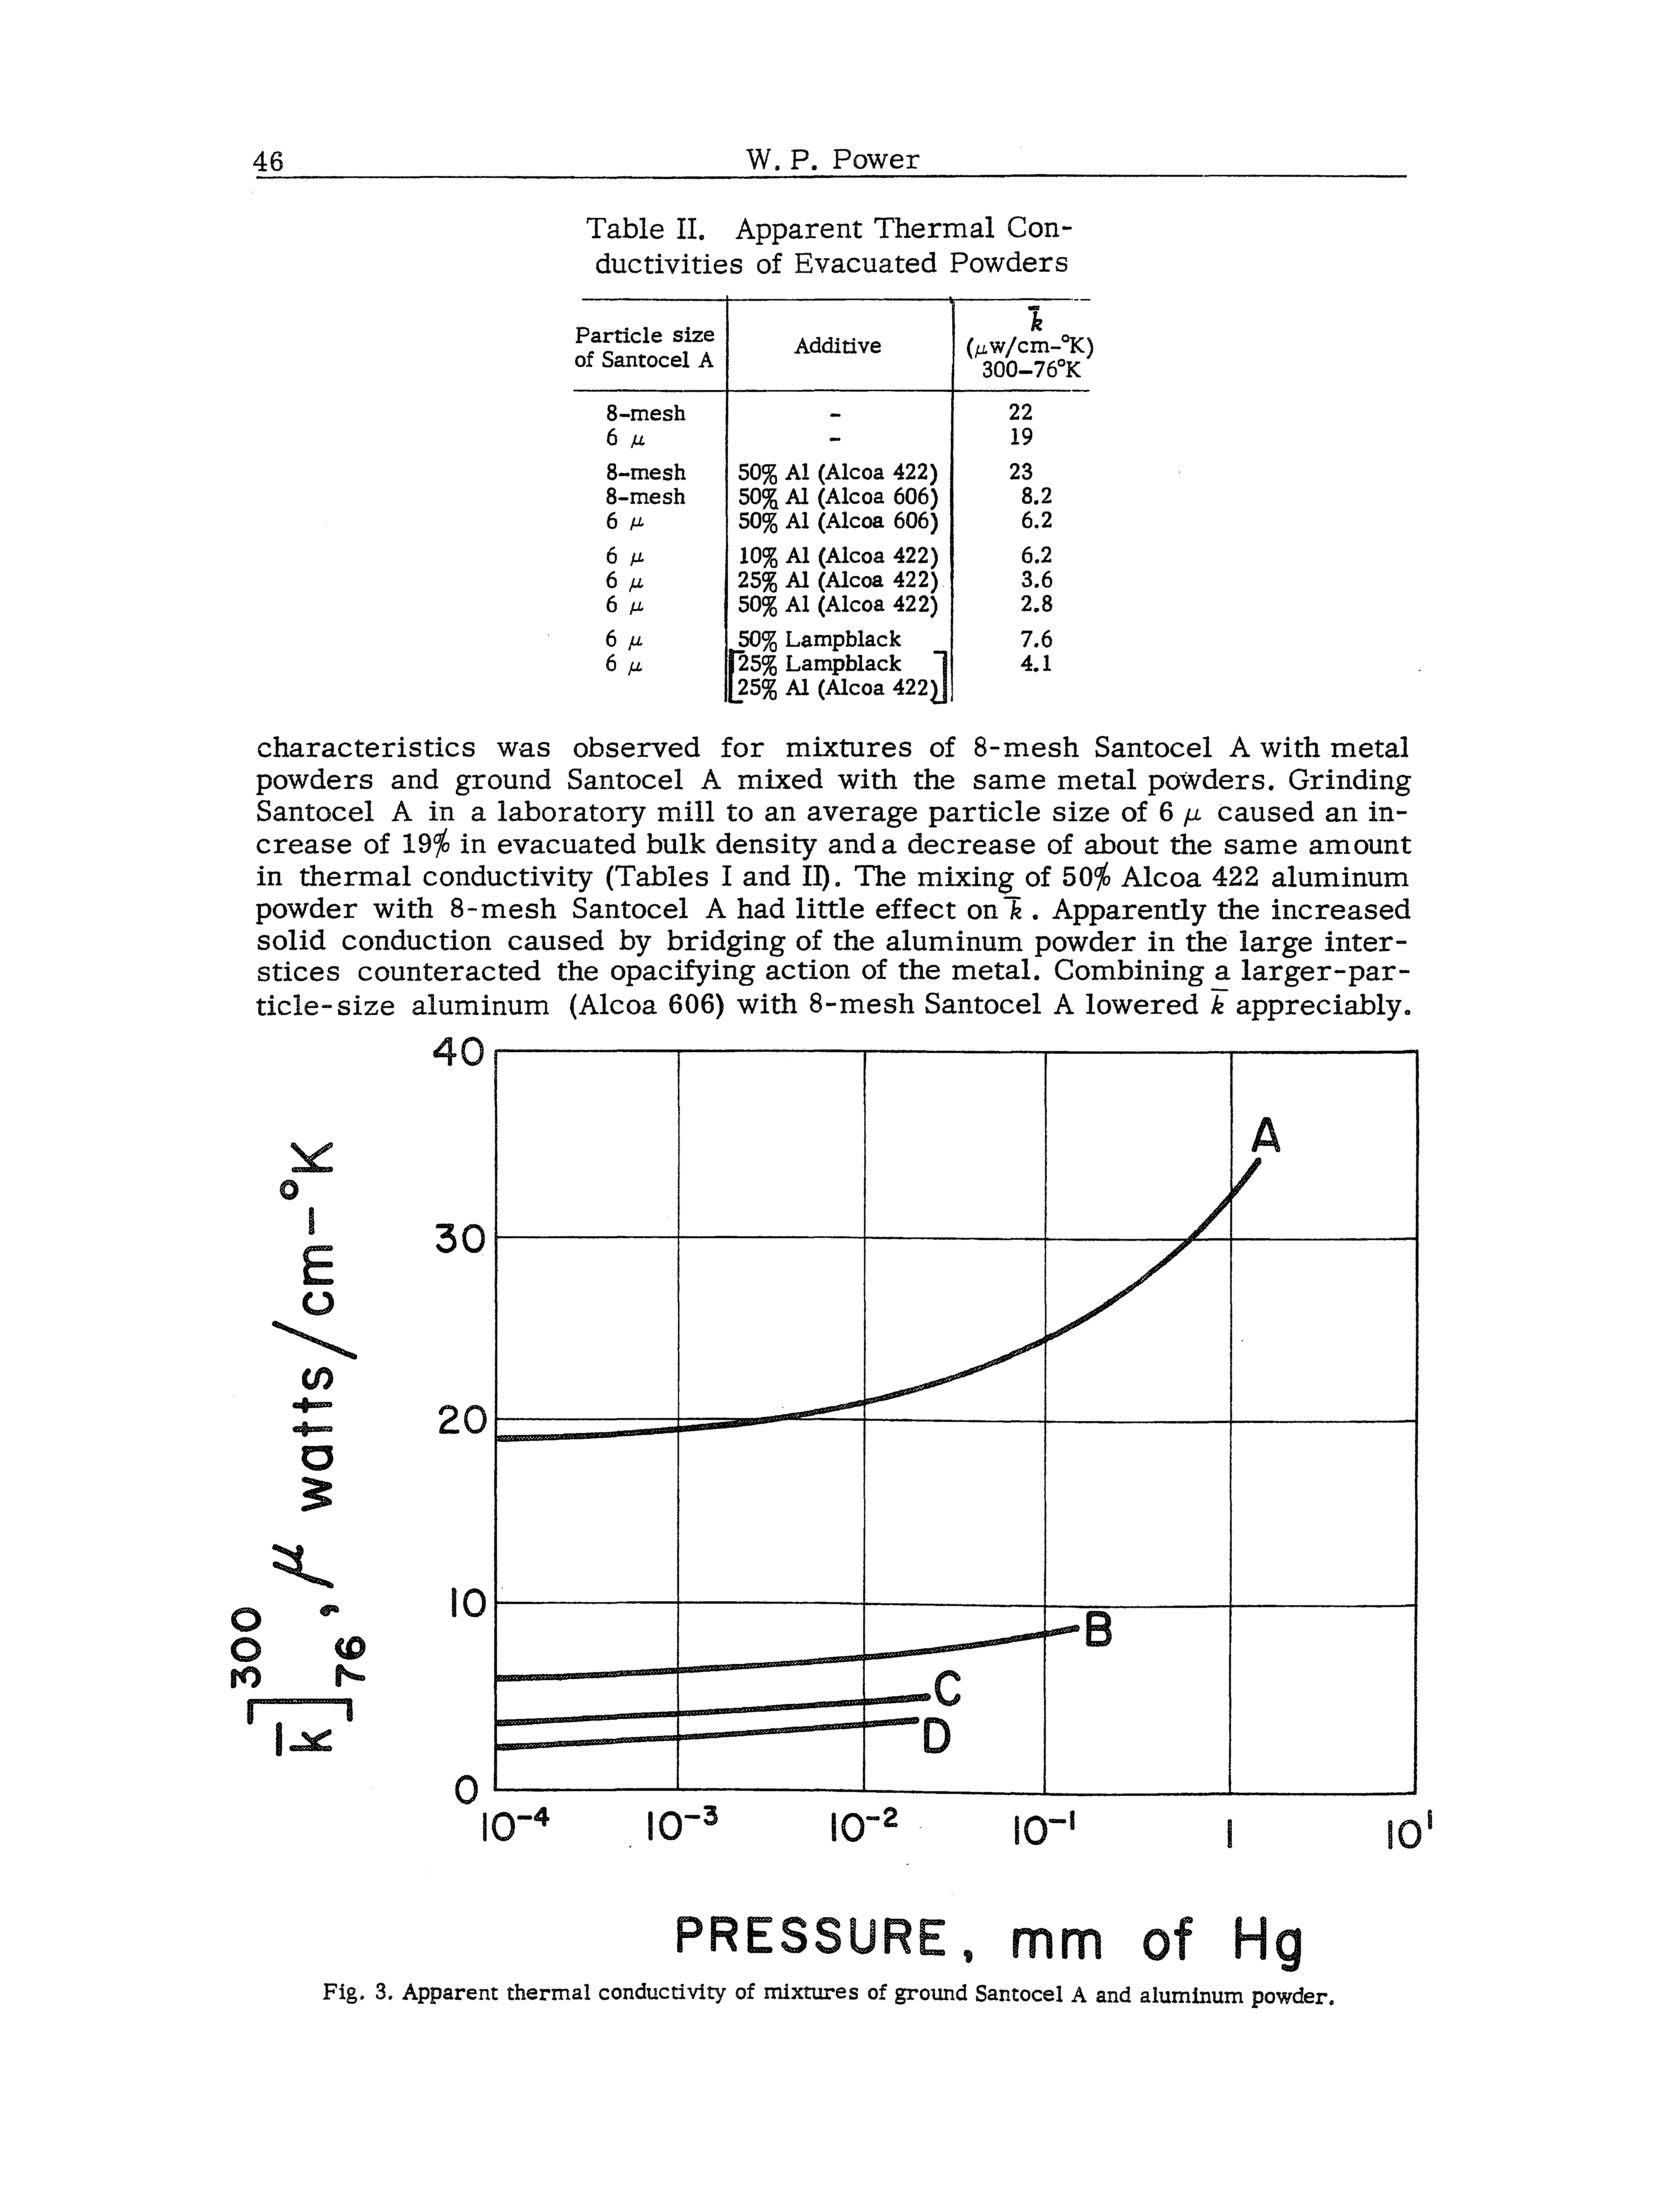 Fig. 3. Apparent thermal conductivity of mixtures of ground Santocel A and aluminum powcfer.